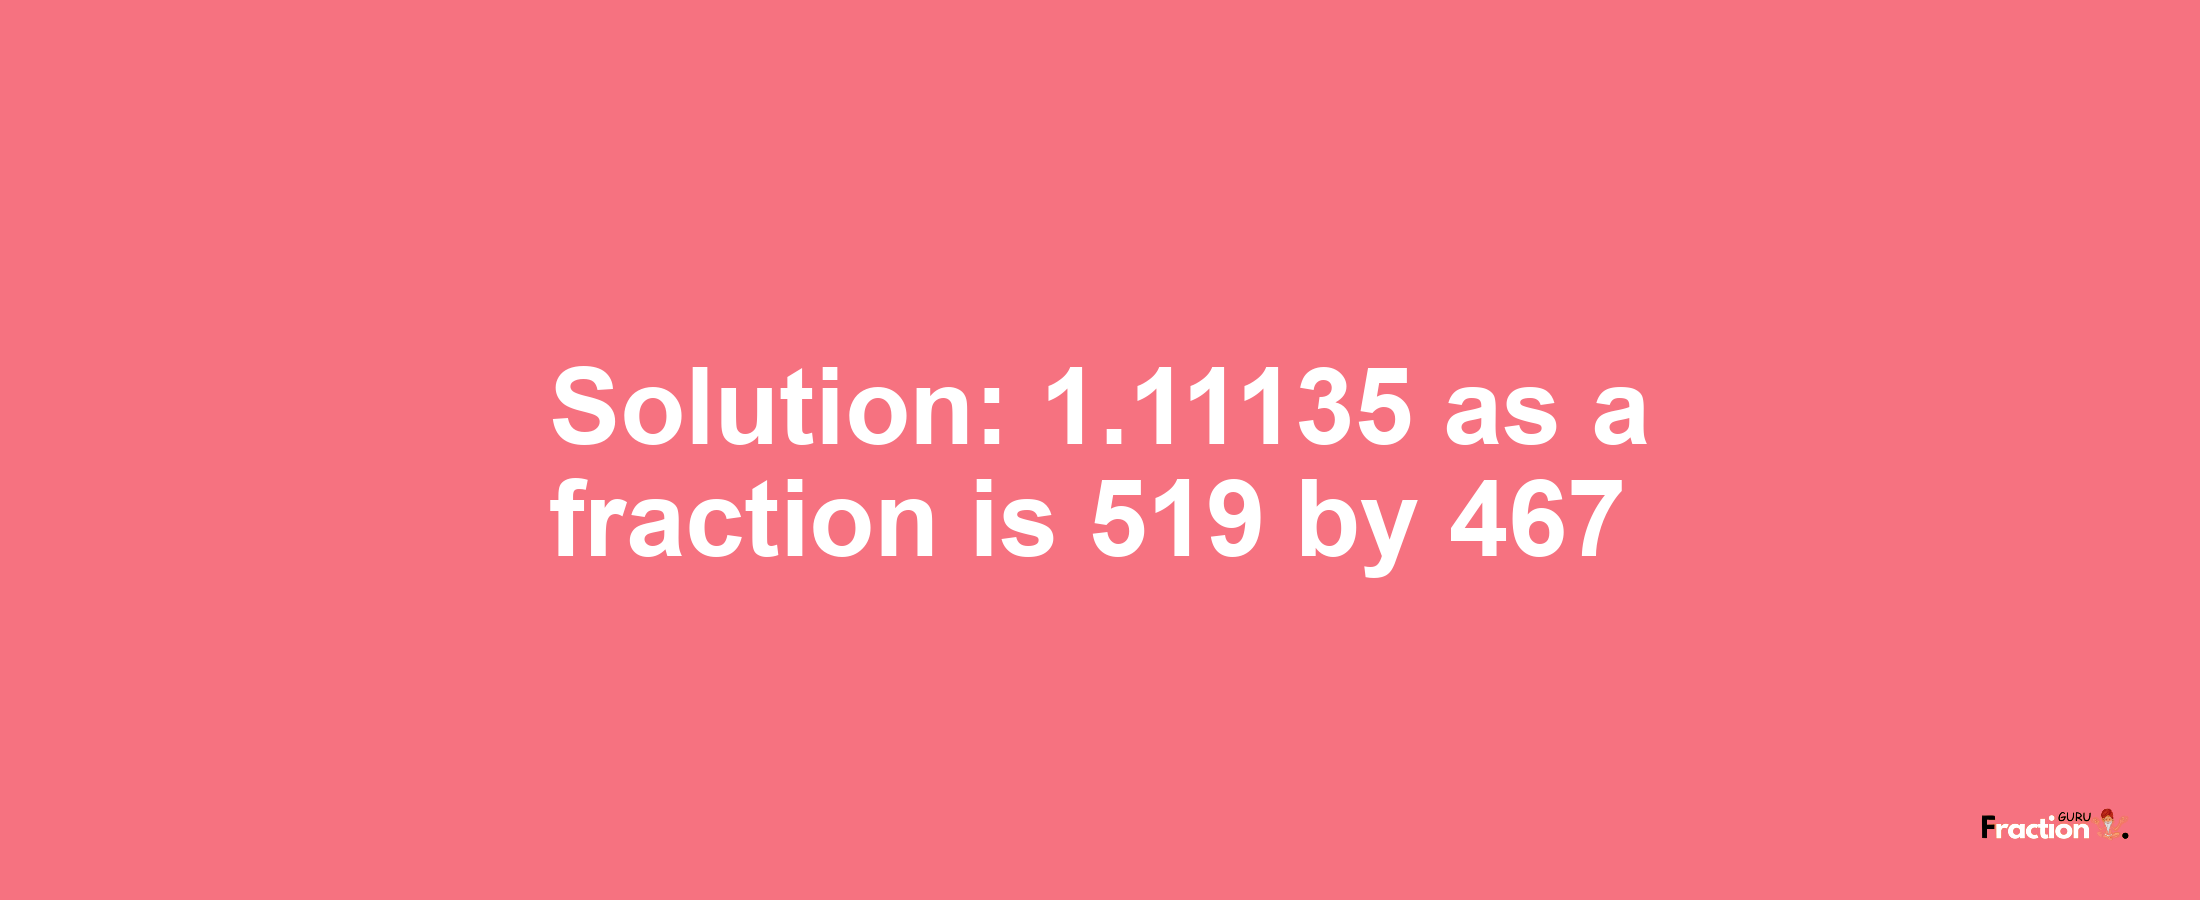 Solution:1.11135 as a fraction is 519/467